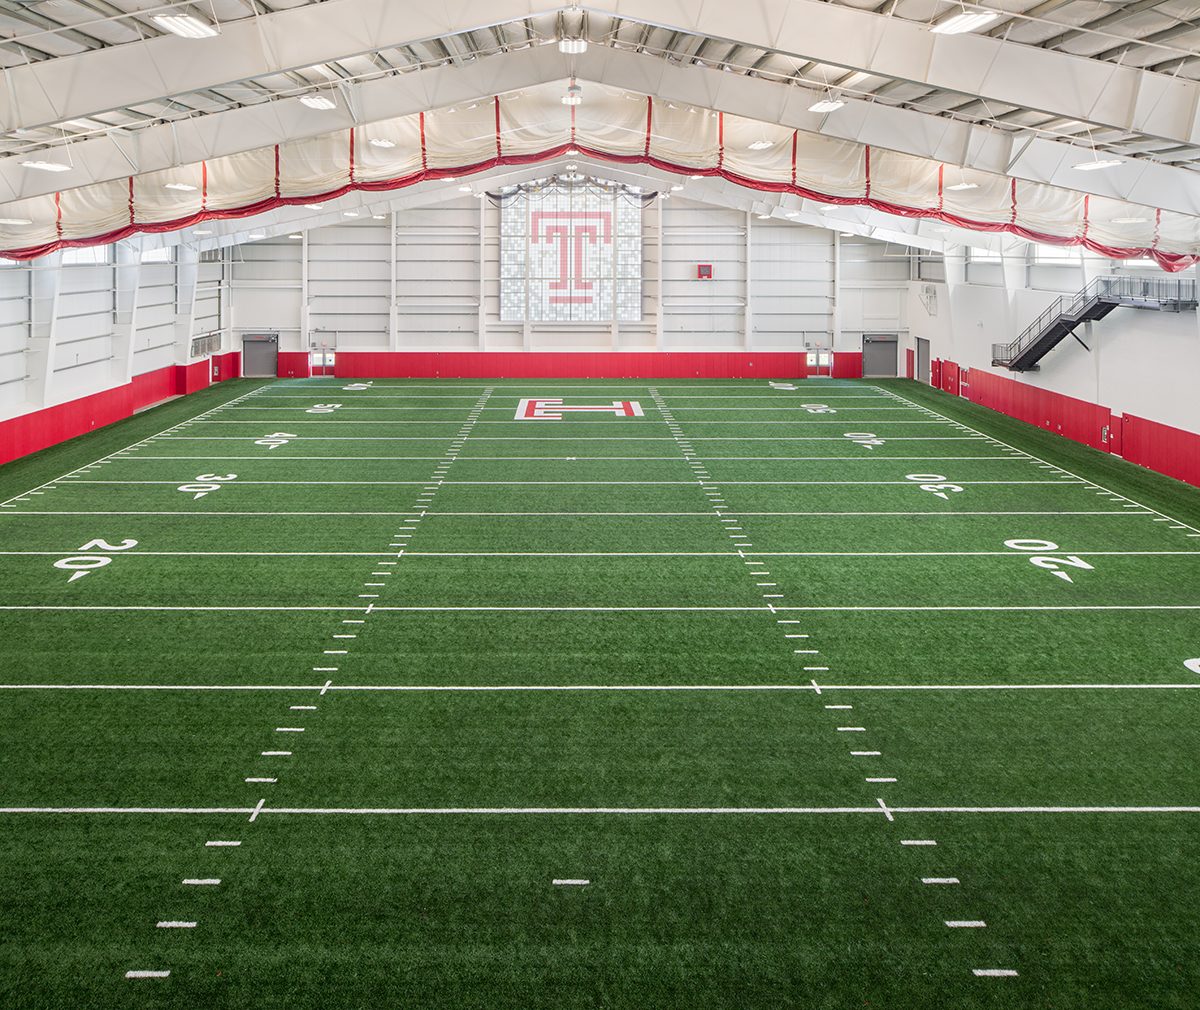 Interior of Temple University football practice facility featuring Kalwall wall system in window with colored inserts.